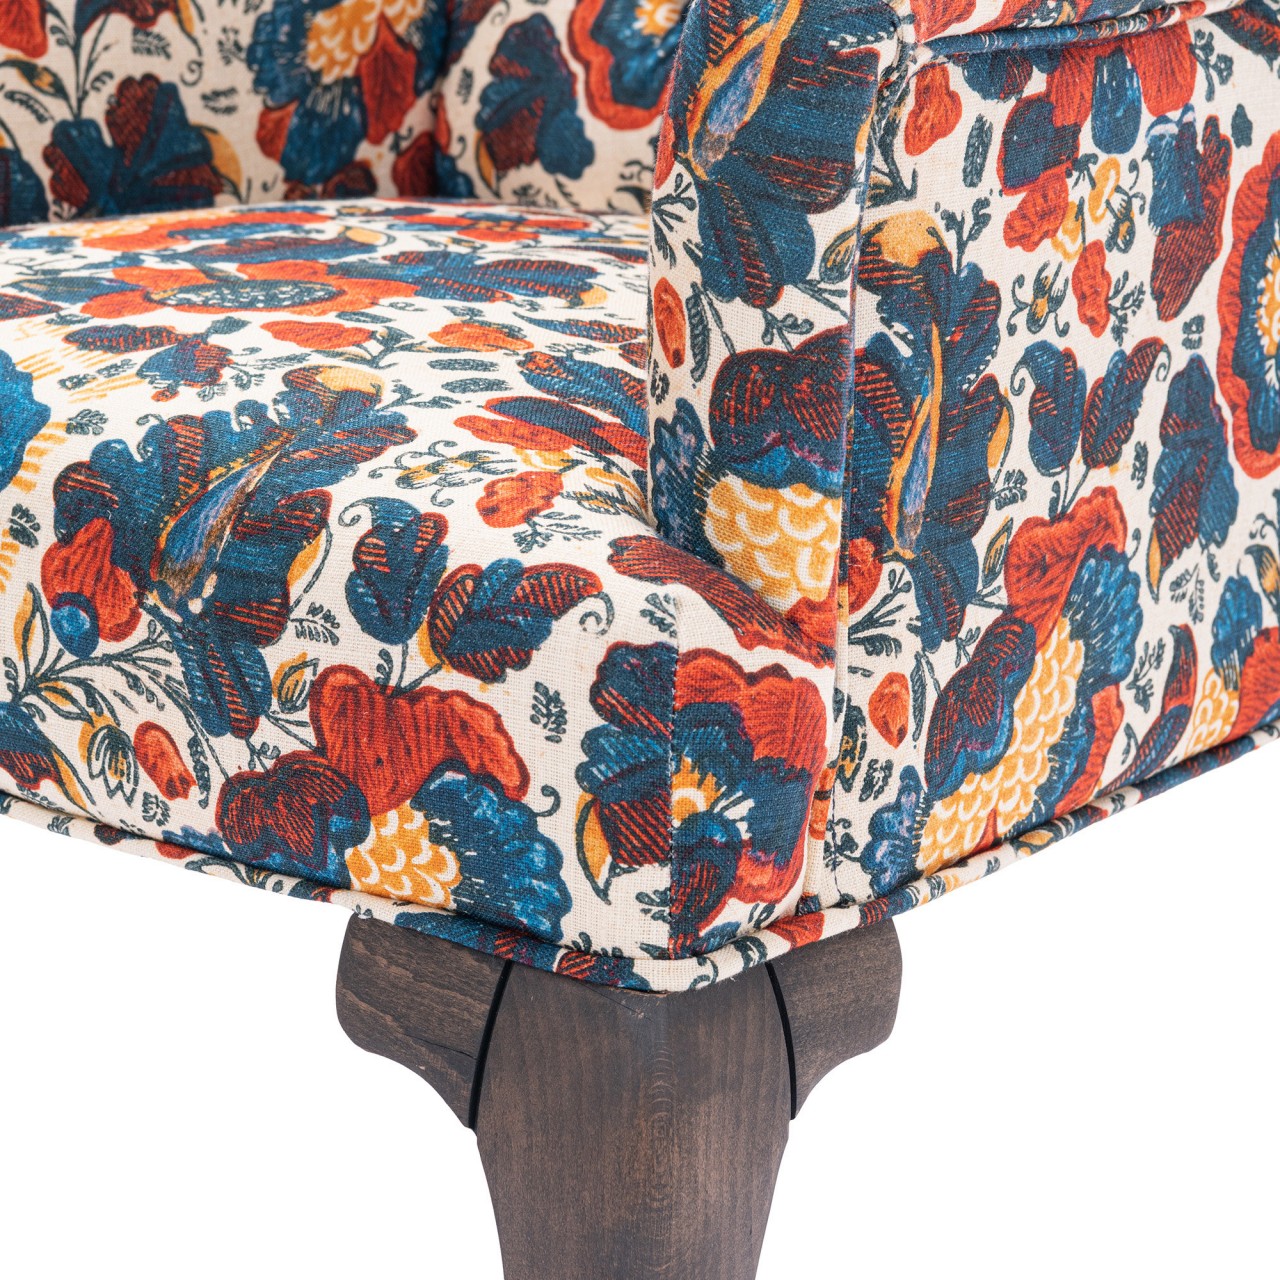 FITZROY TUFTED CHAIR - REMONDINI FLORAL Fabric